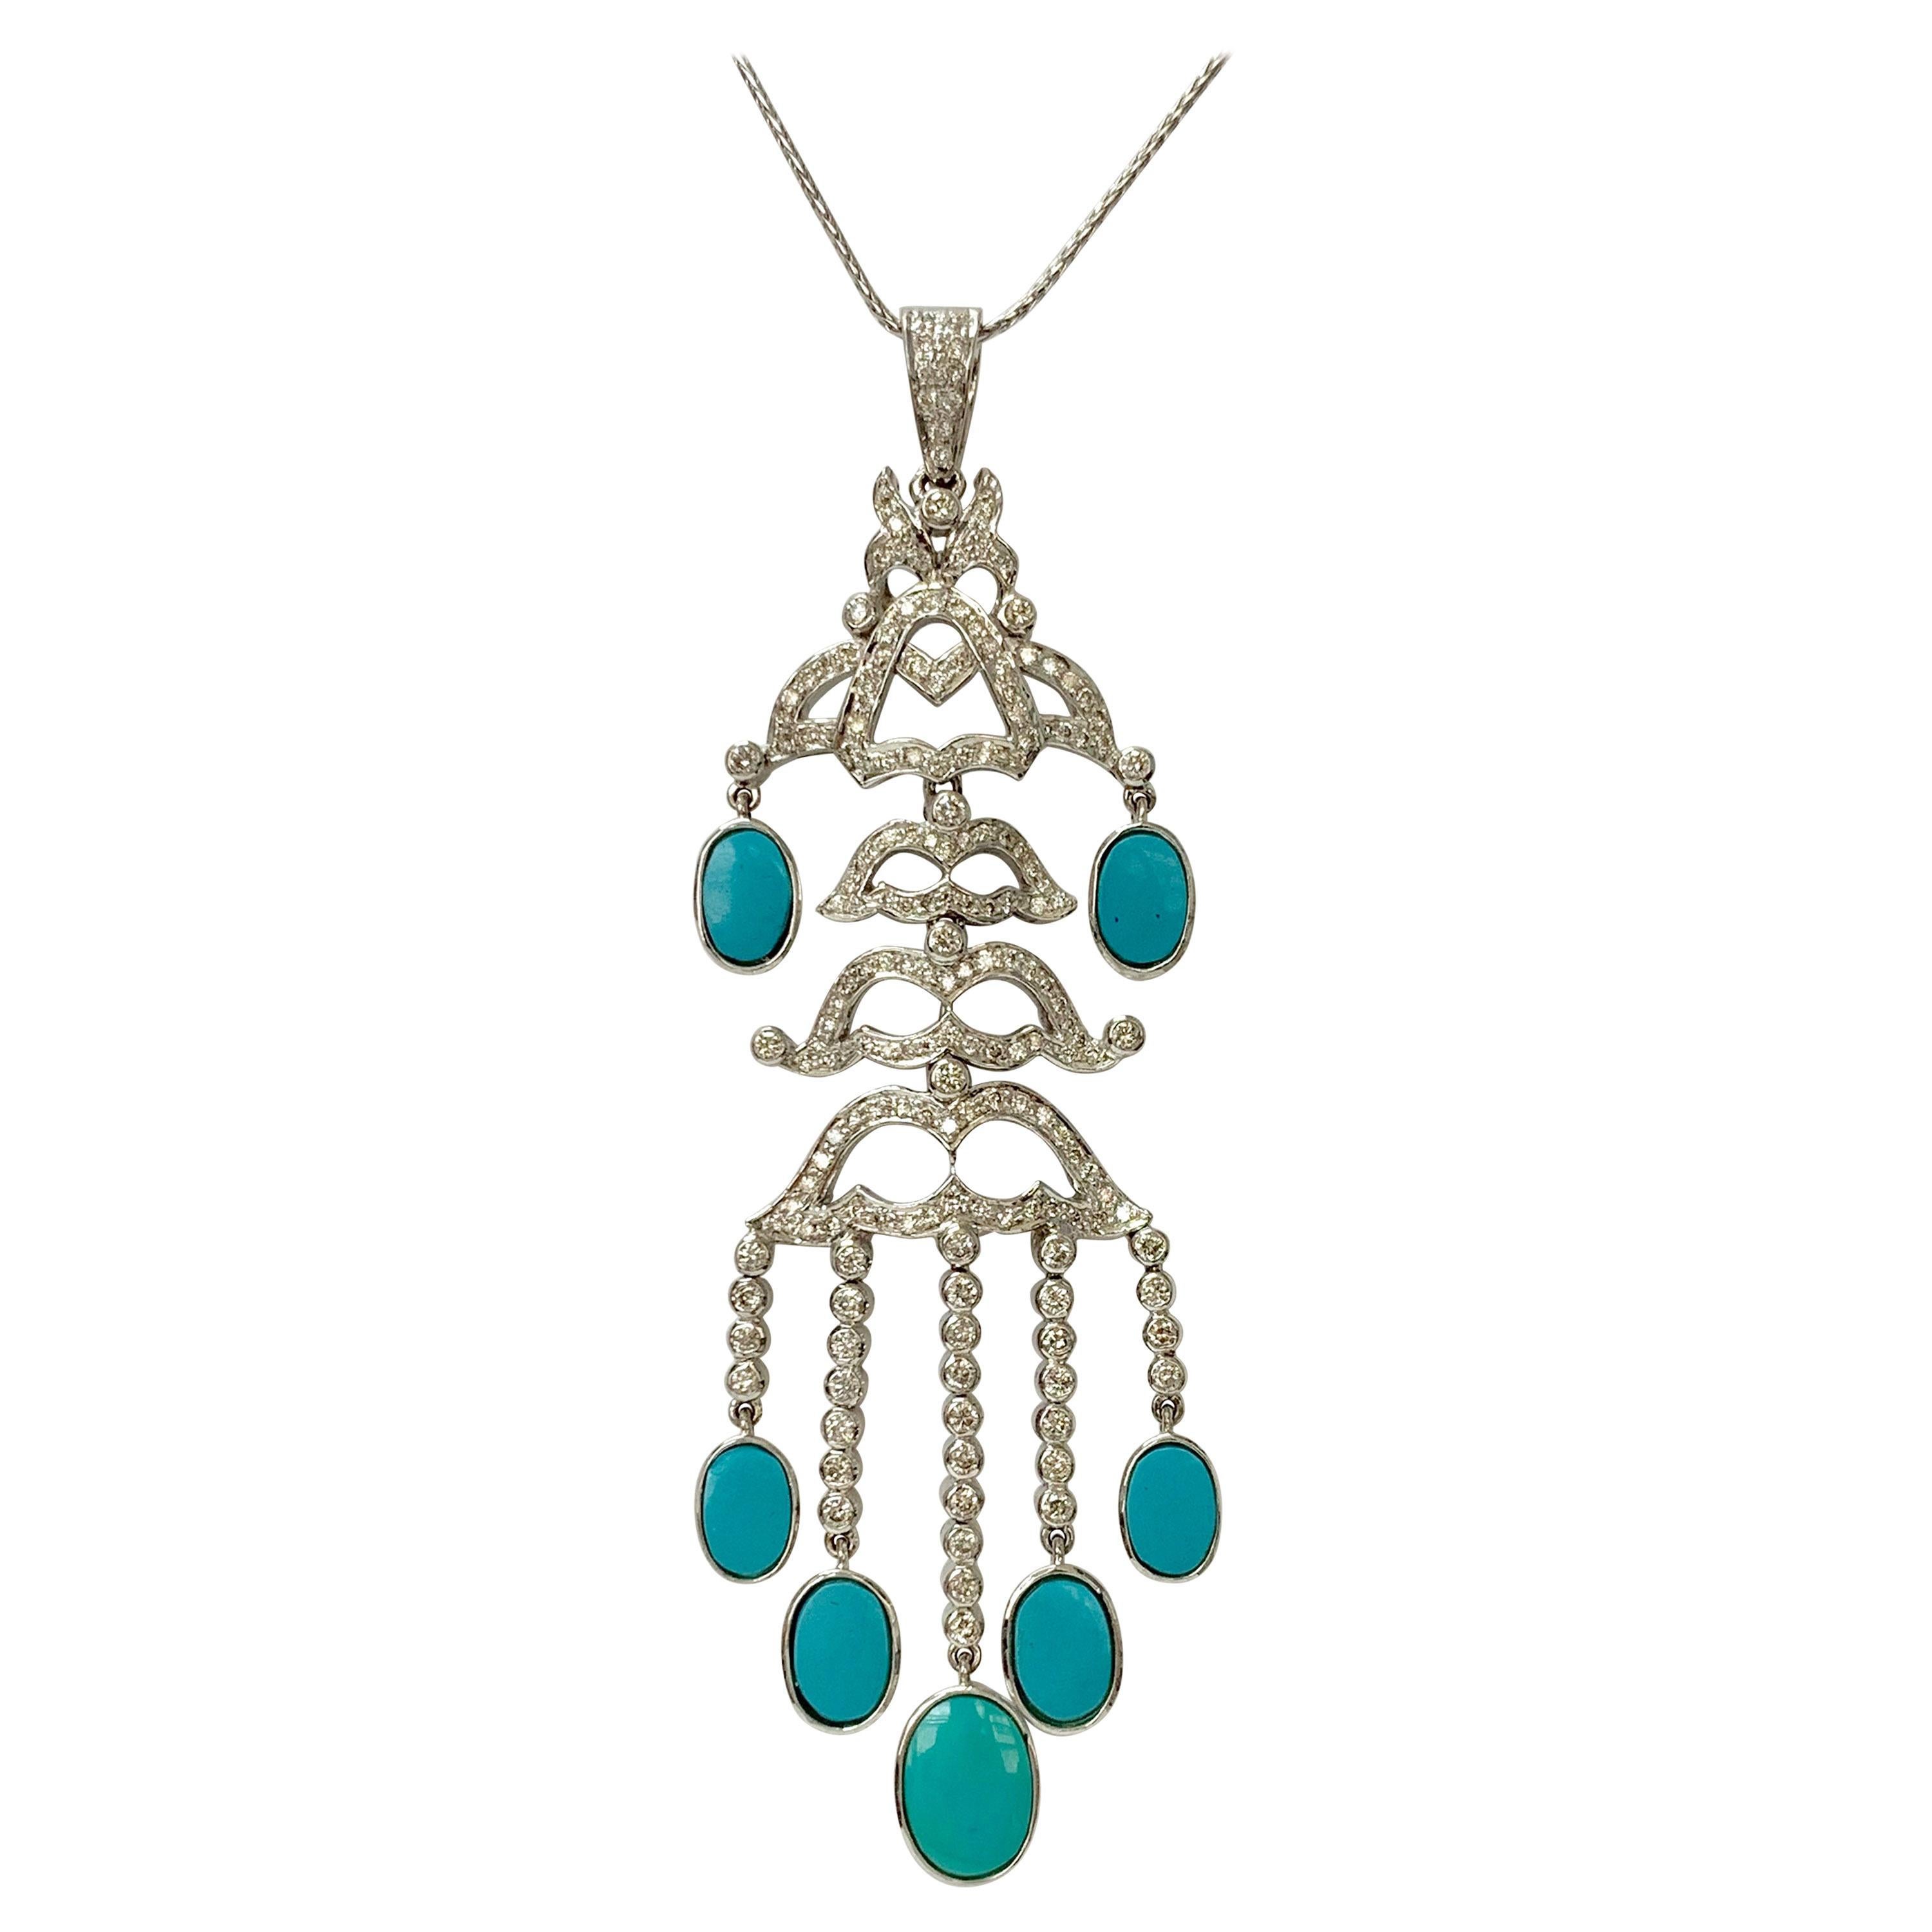 Diamond and Turquoise Pendant Necklace in 18k White Gold